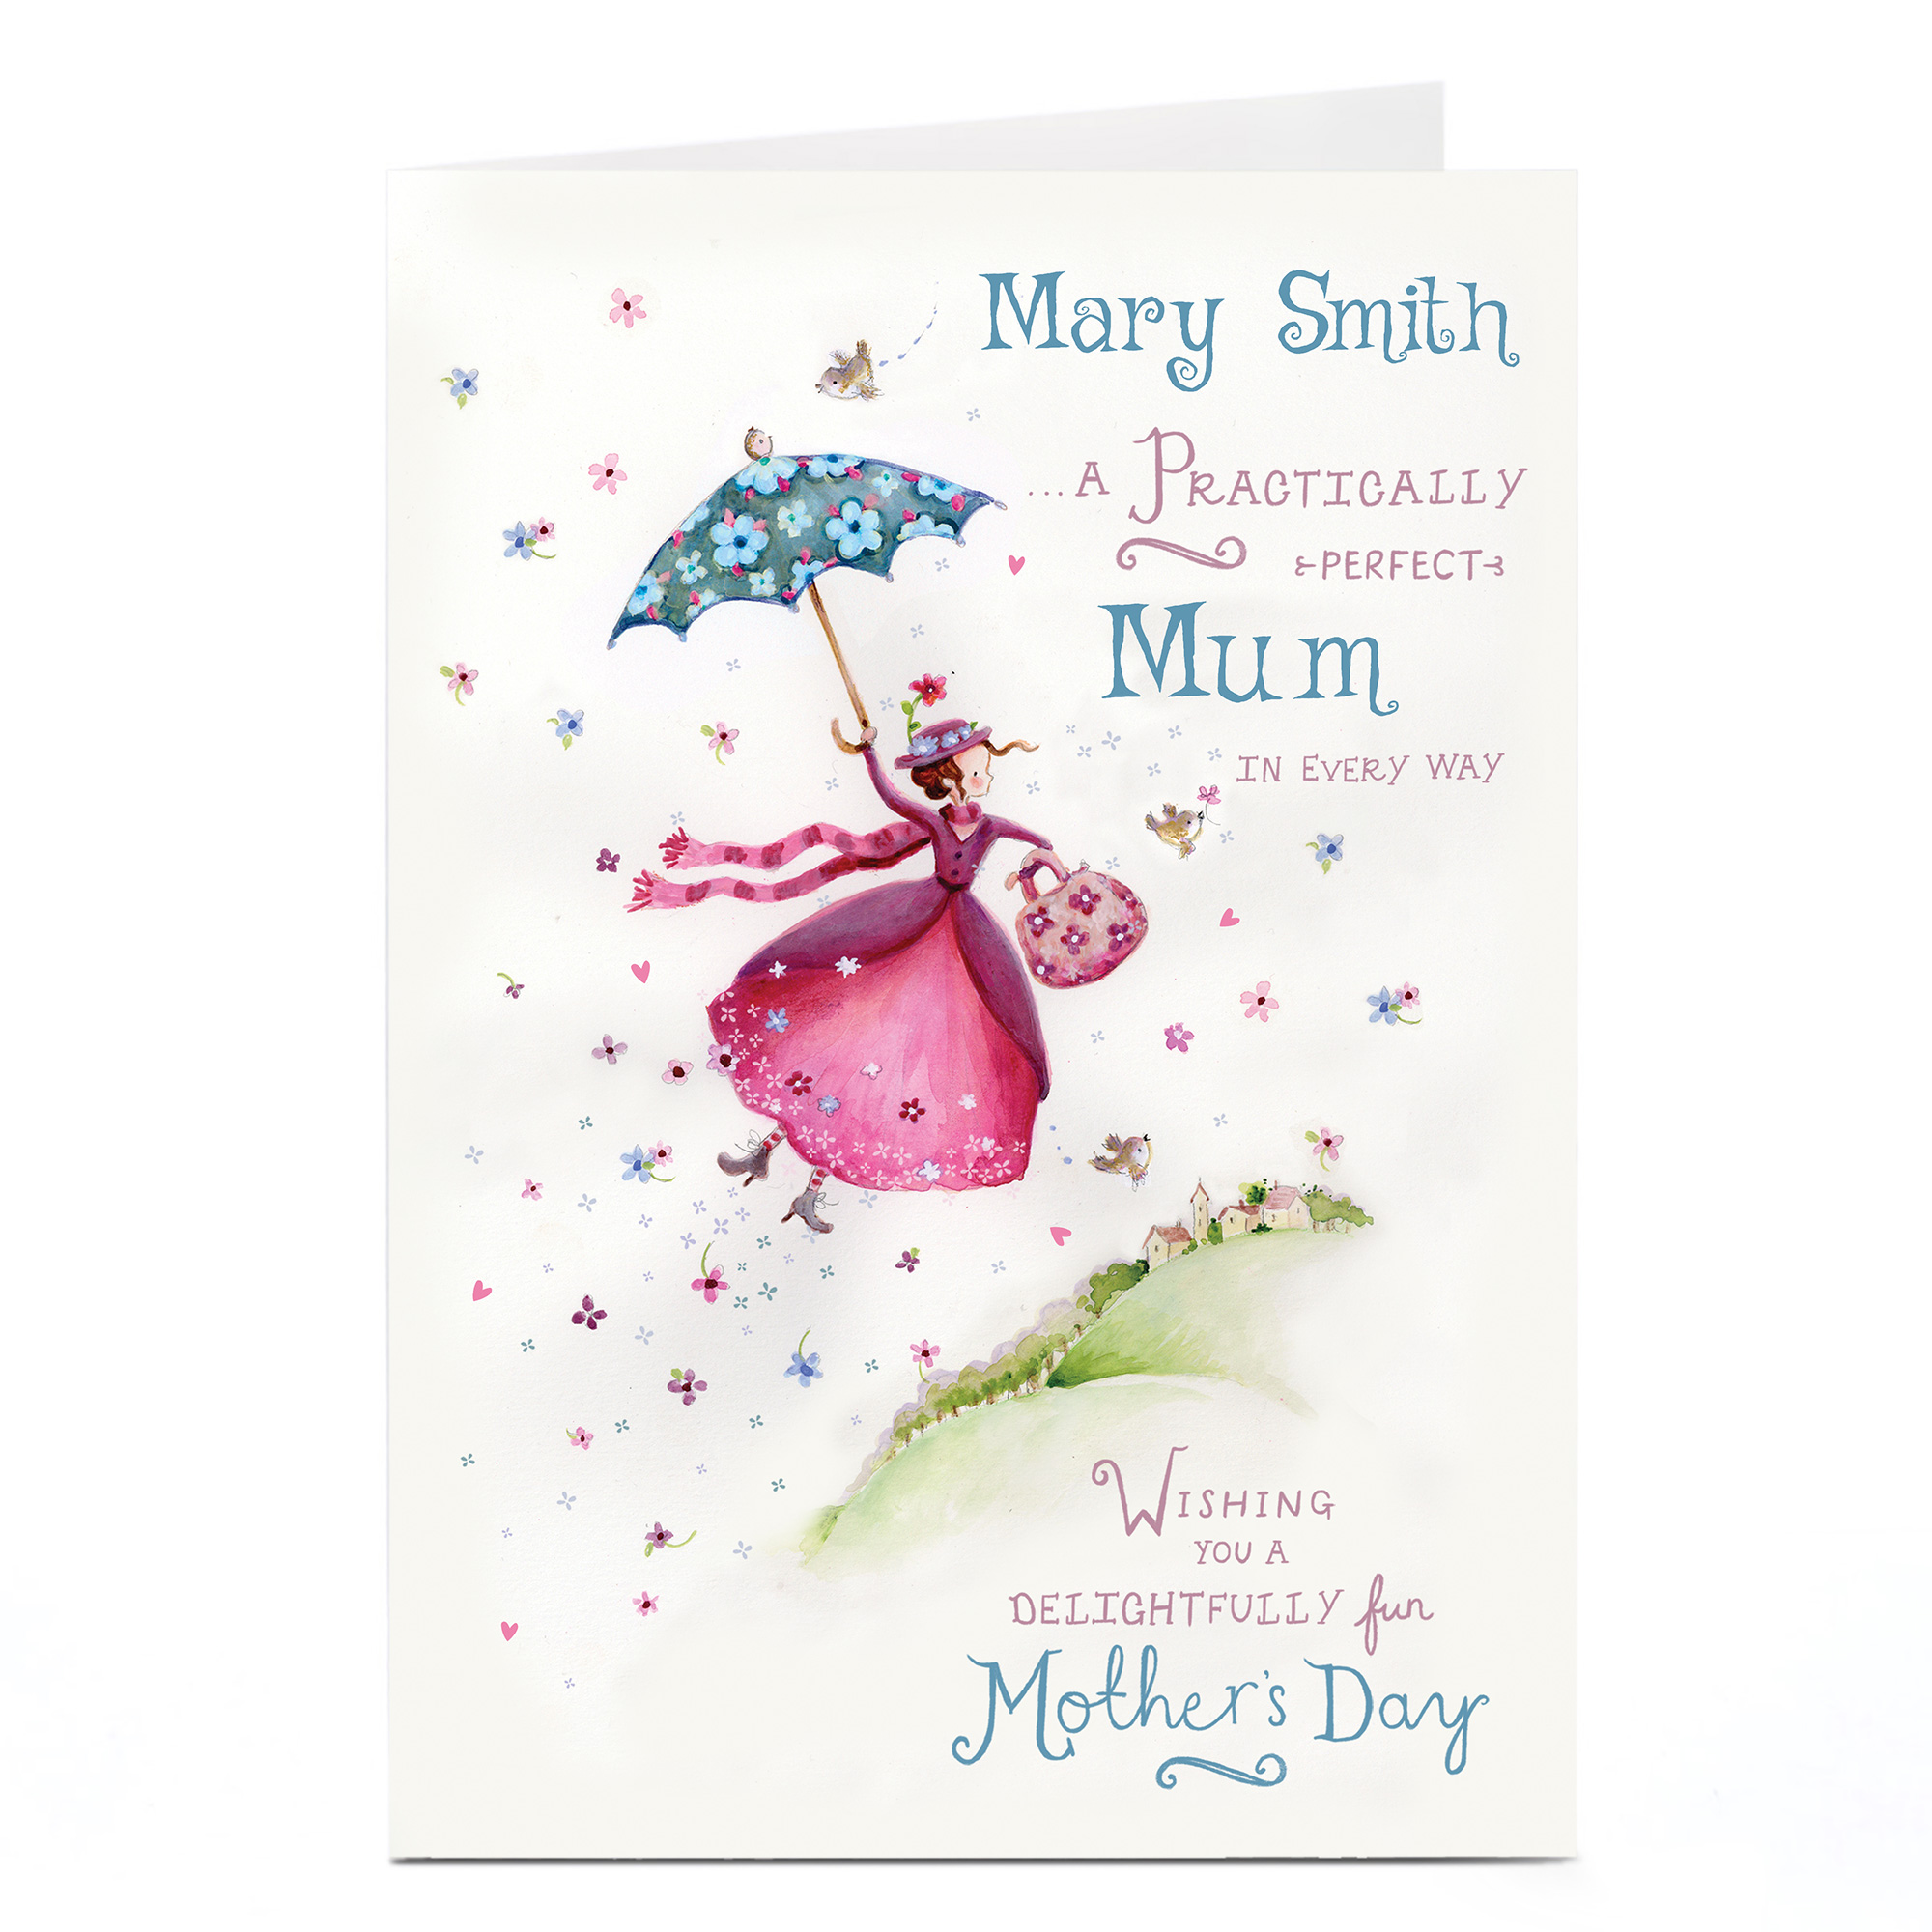 Personalised Mother's Day Card - Practically Perfect In Every Way